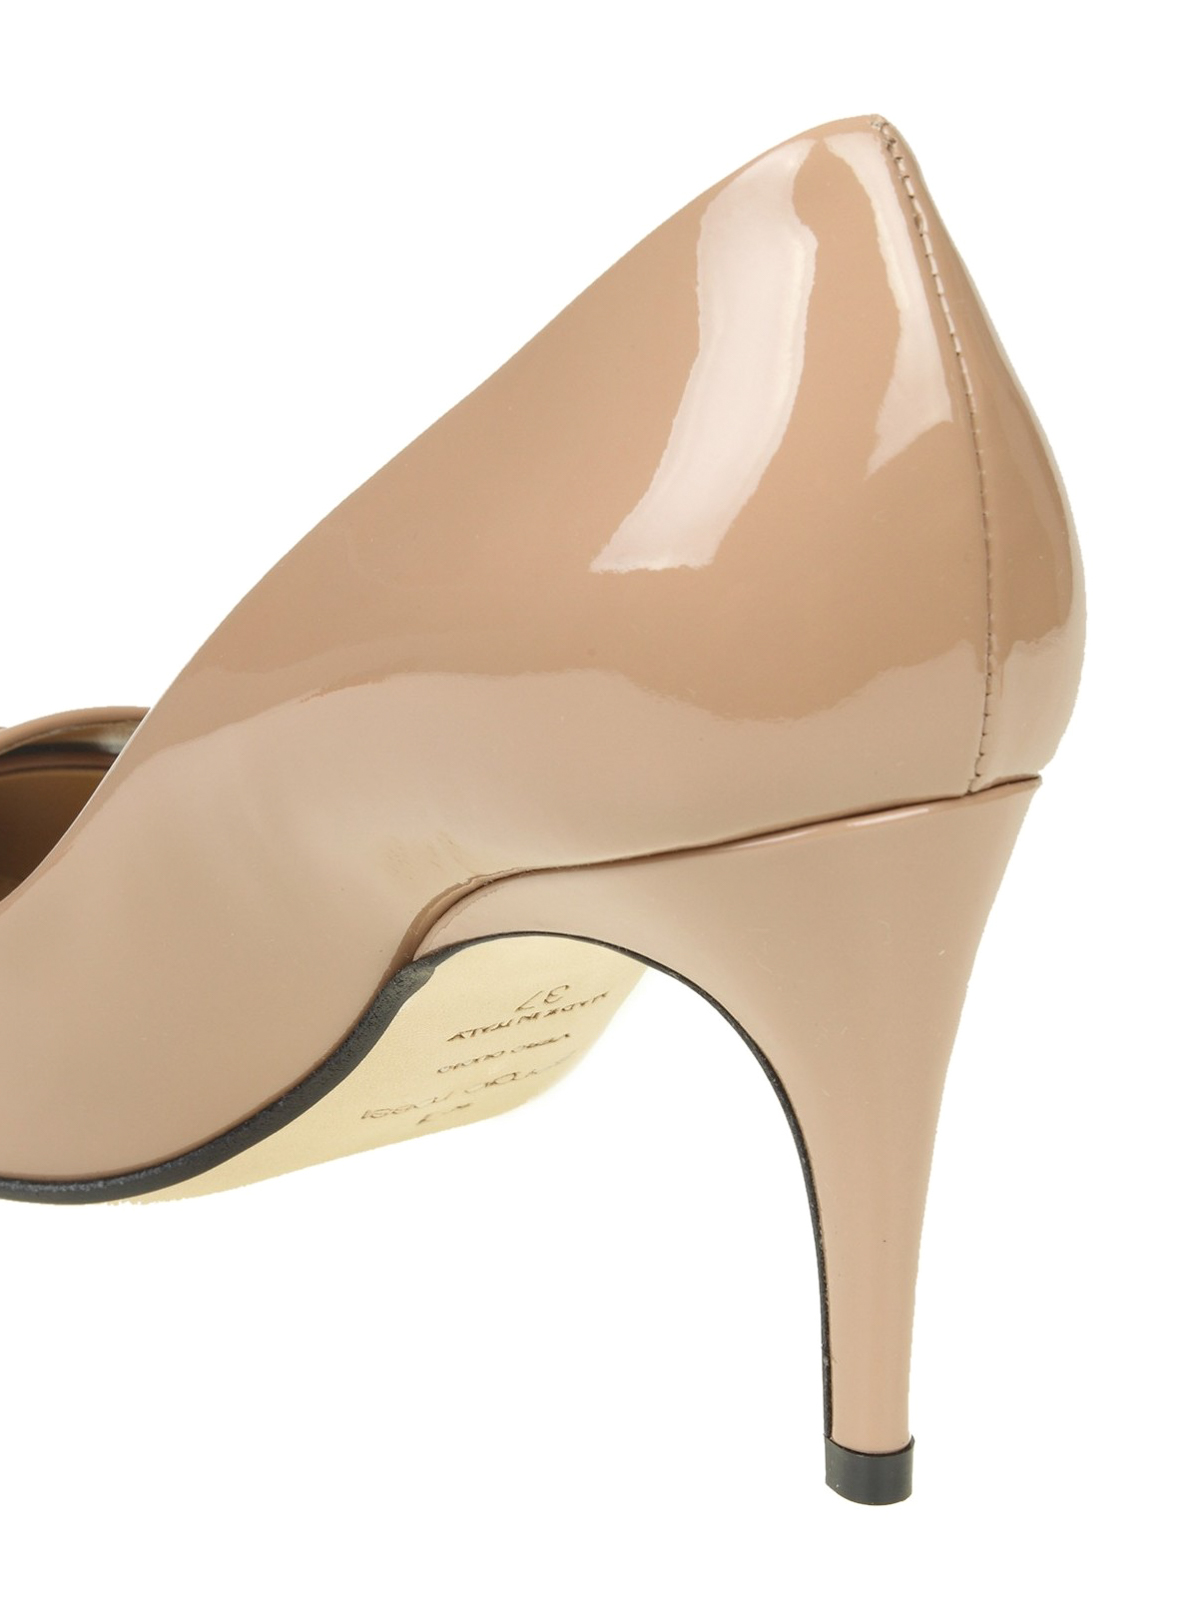 Court shoes Sergio - Sr1 nude patent leather - A78950MVIV015755